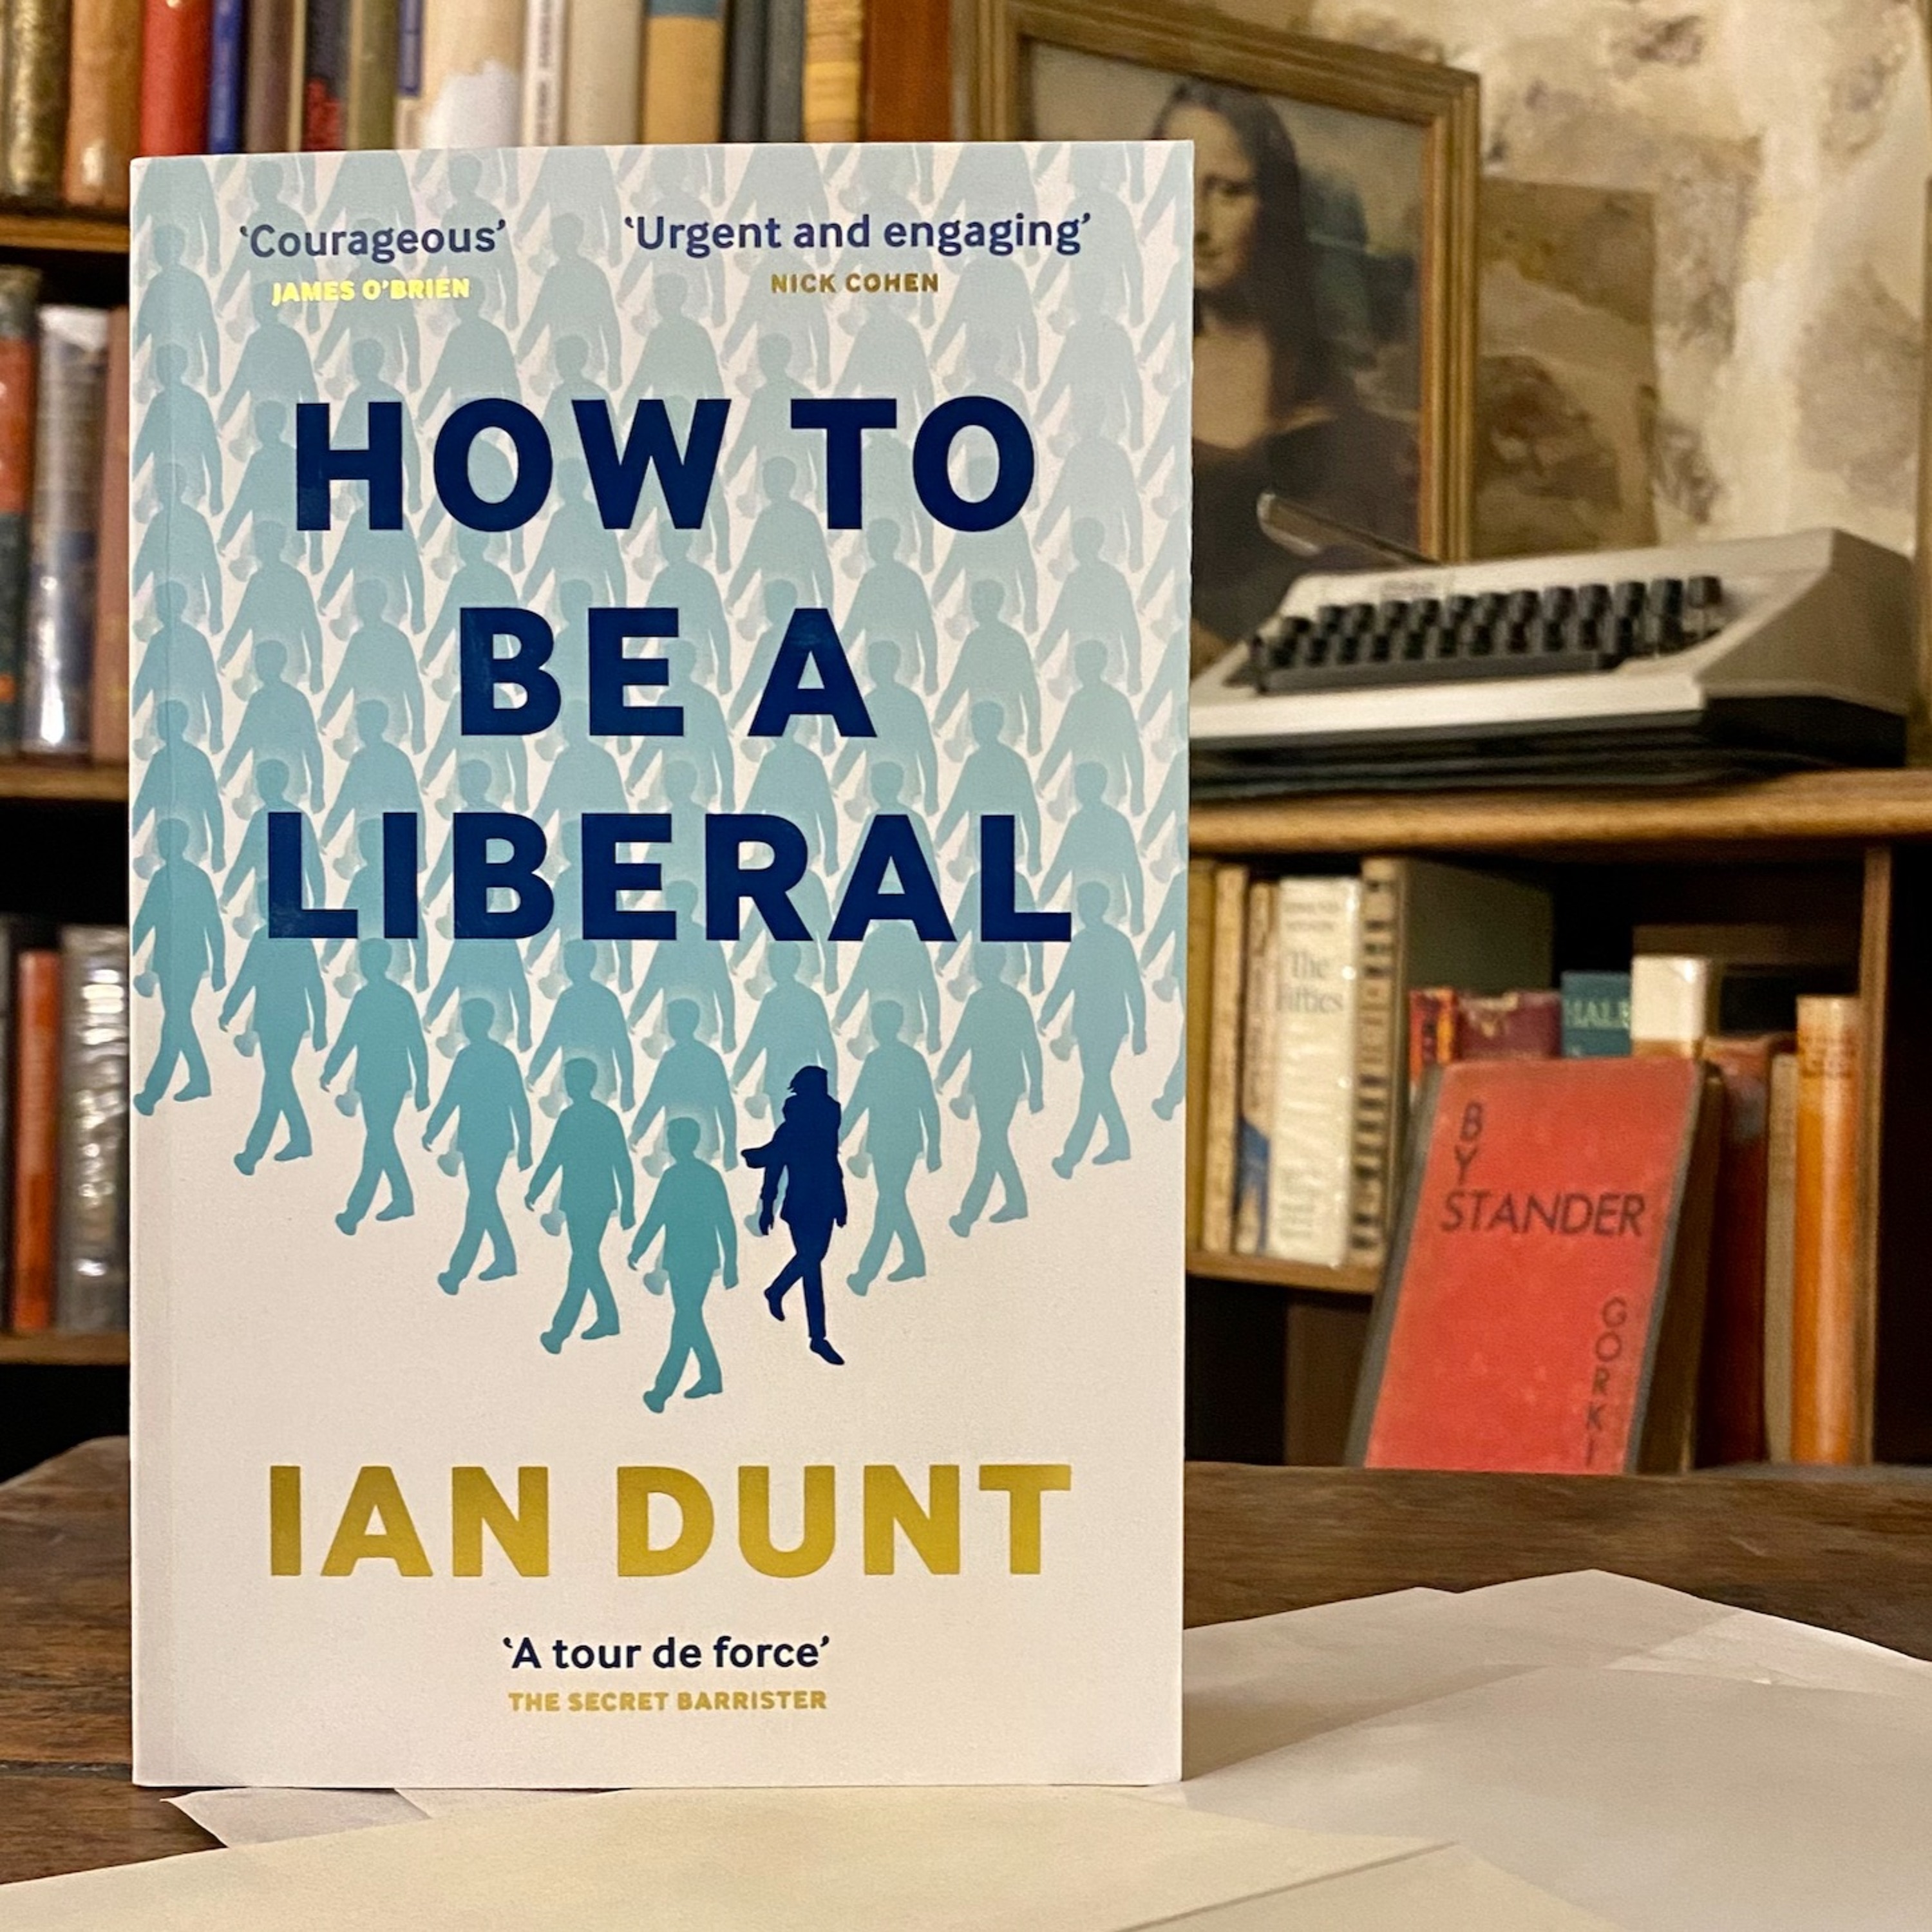 Ian Dunt on How to Be a Liberal